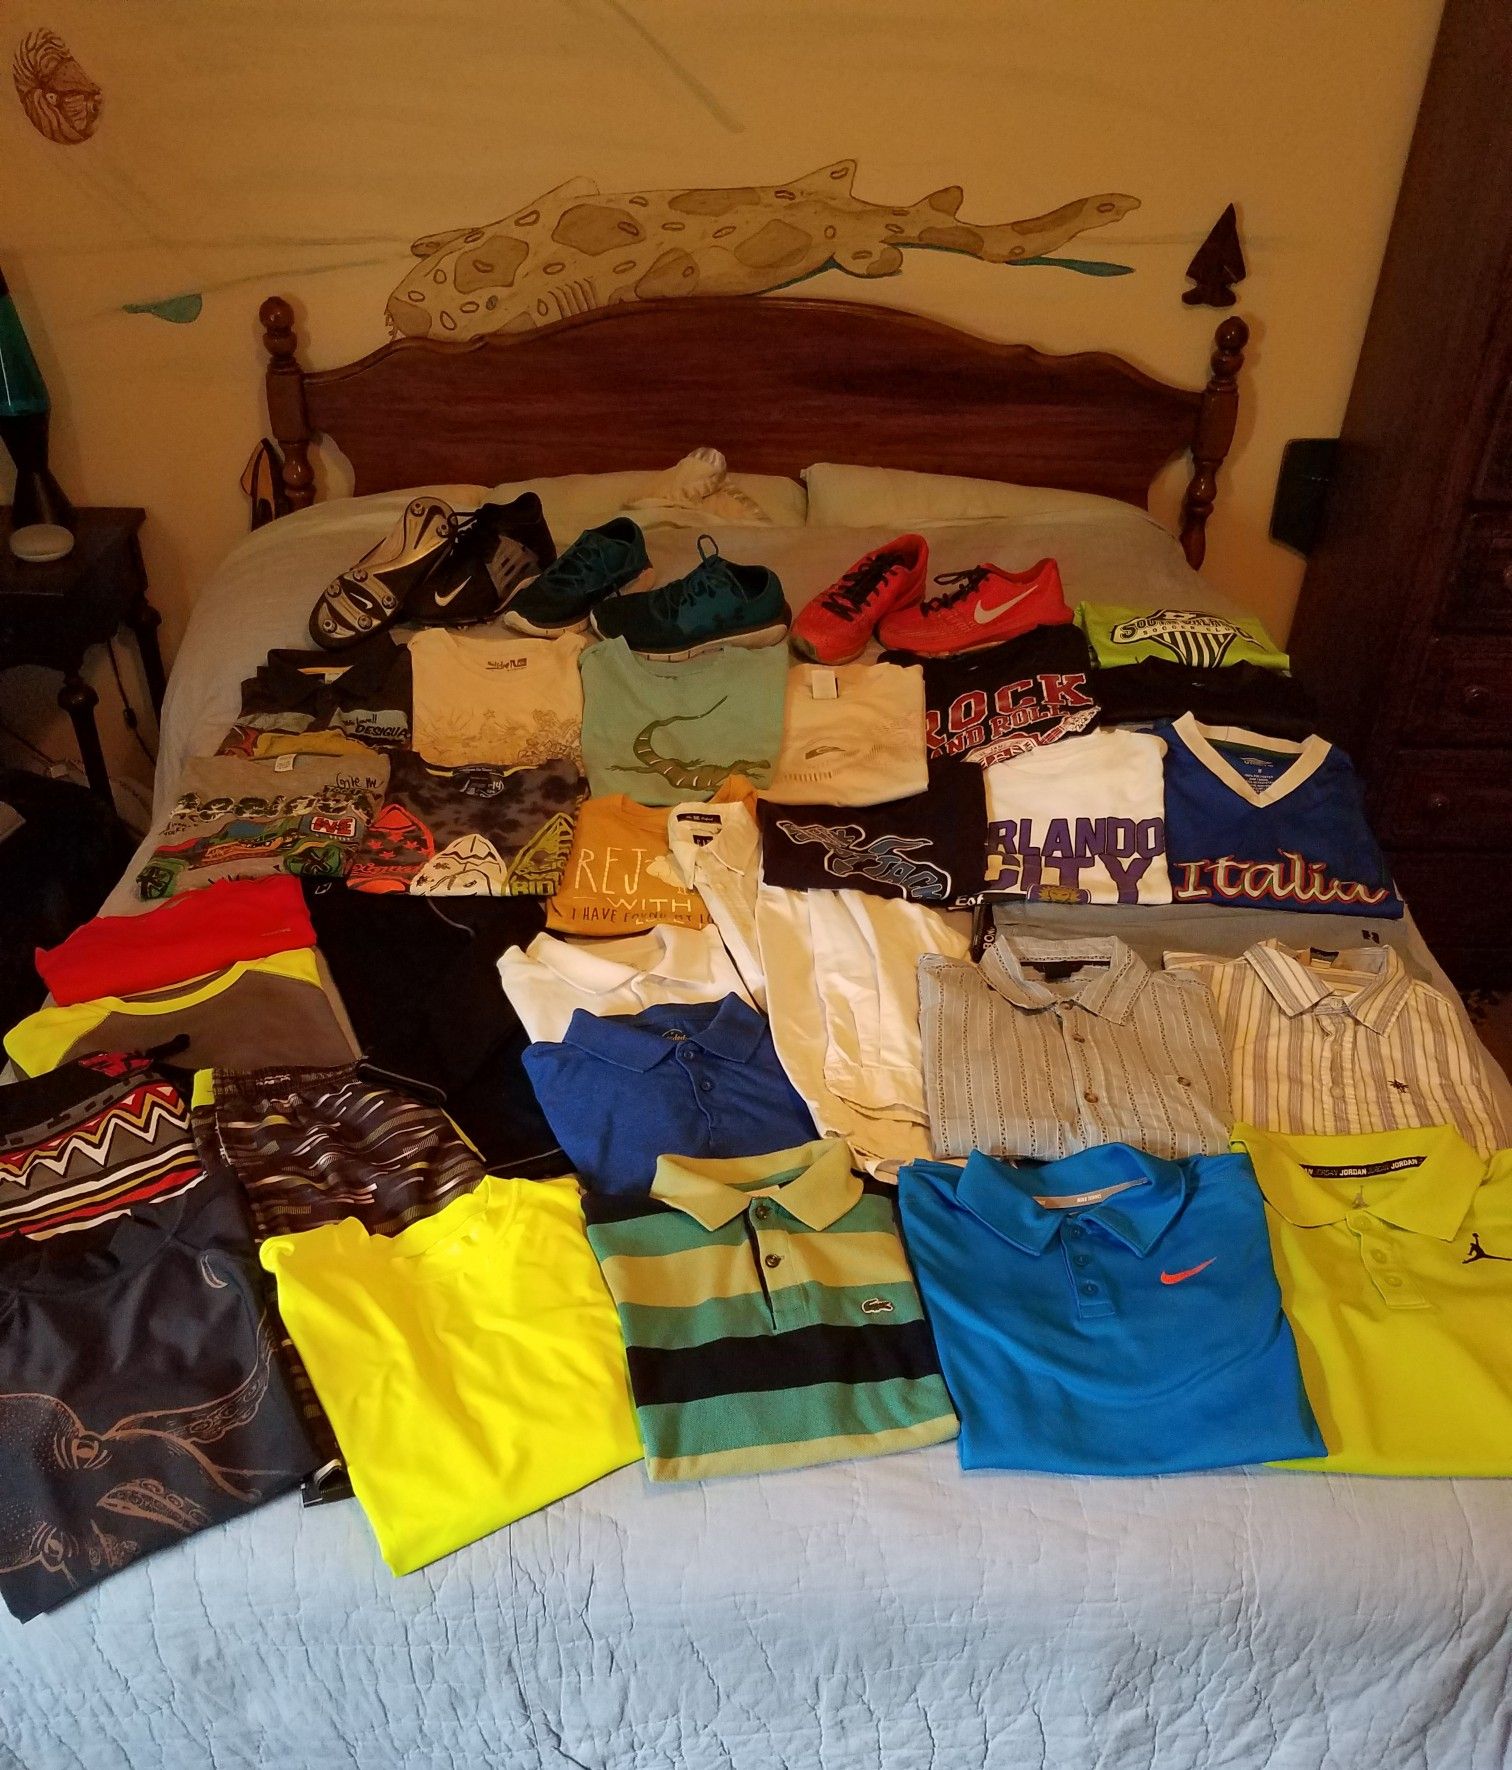 Boys Clothes "Bed Full Of Children's Clothes and Shoes" 32 Items, Clothes Sizes 10-16